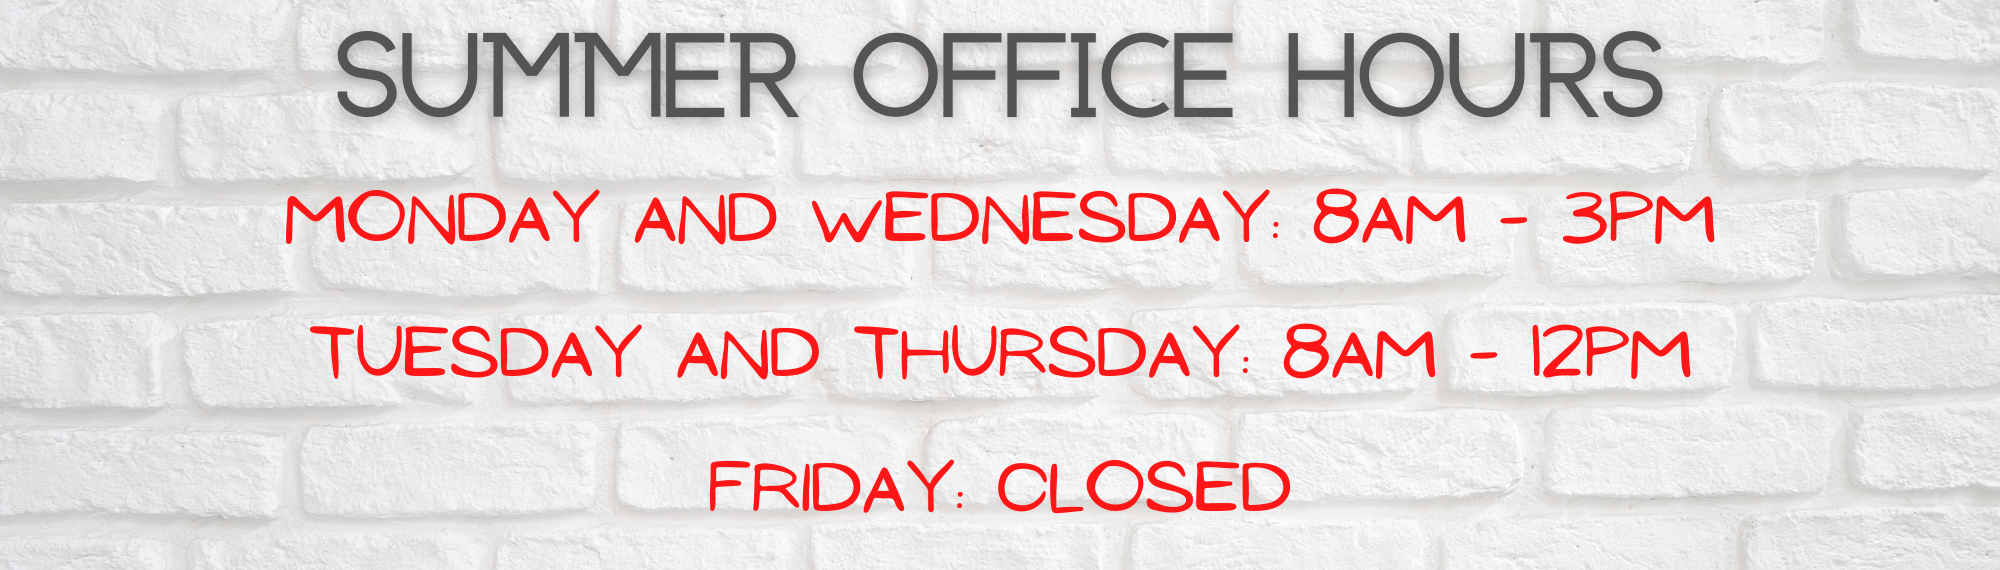 Summer Hours, Monday and Wednesday 8am - 3pm, Tuesday and Thursday 8am - noon, Friday closed